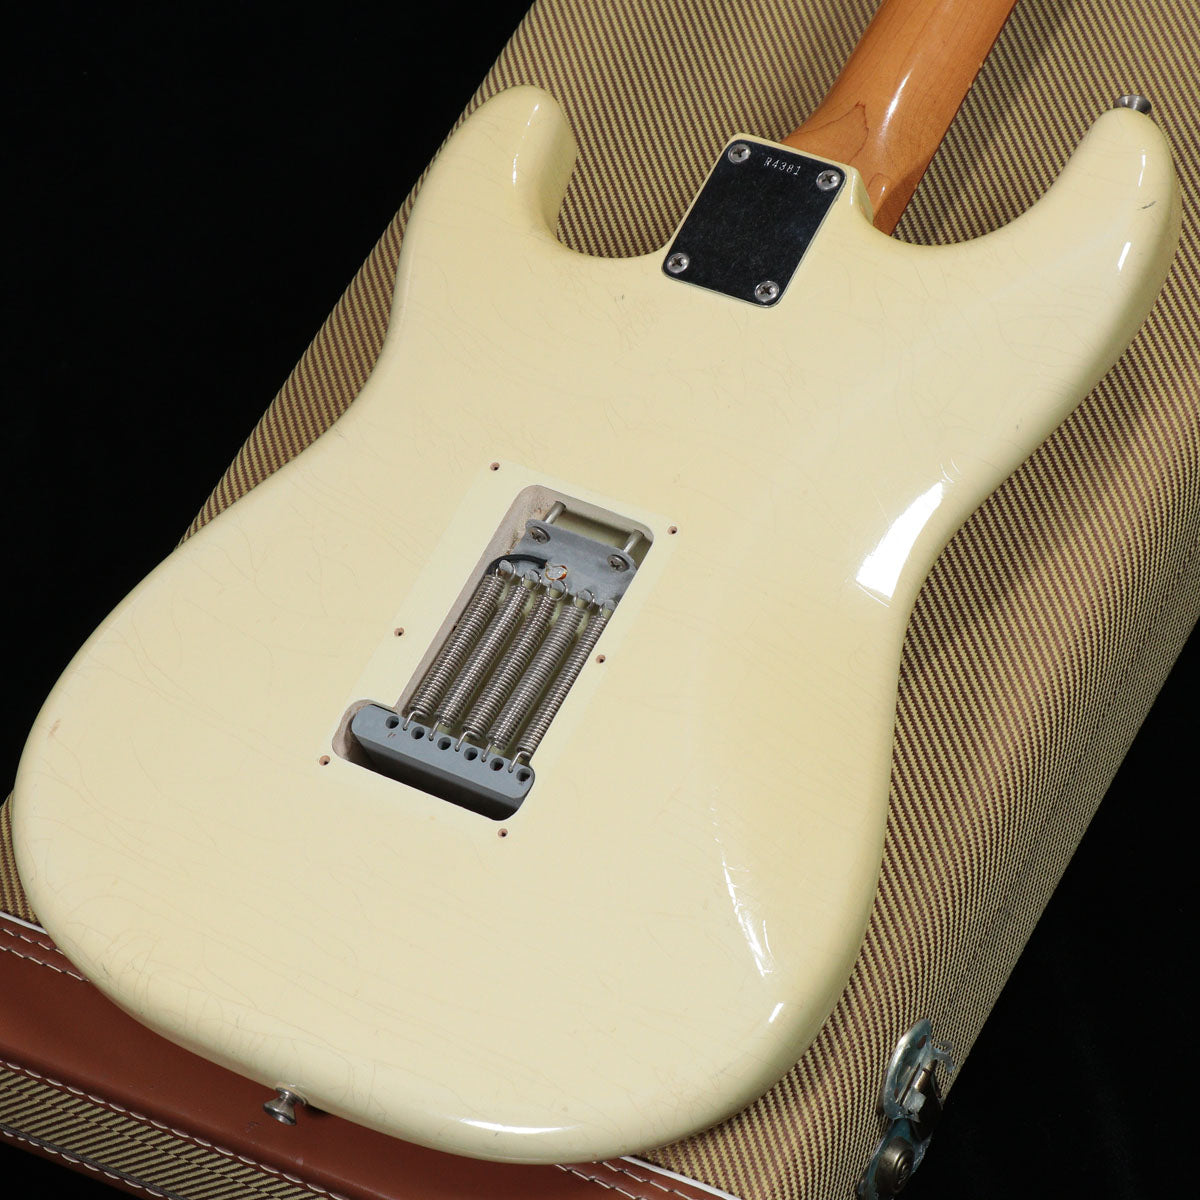 [SN R4381] USED Fender Custom Shop / 1960 Stratocaster Closet Classic OWT w/JC Stamp 1999 [05]